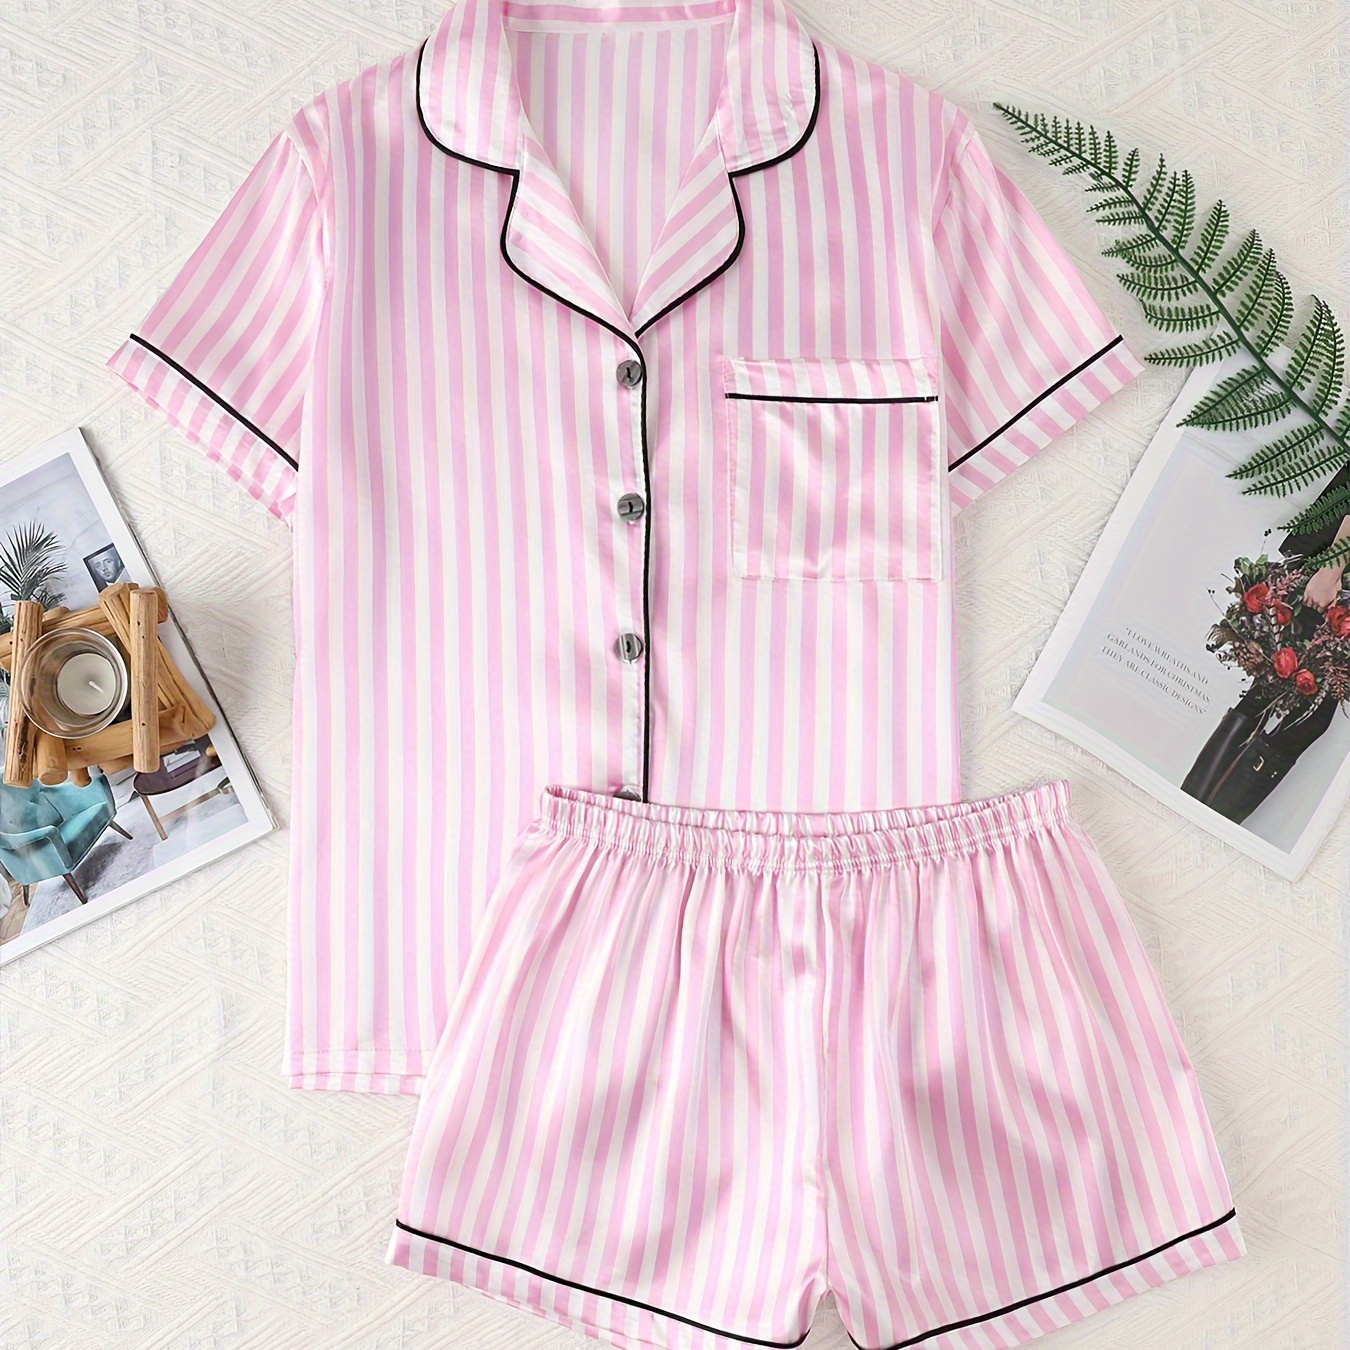 

Women's Stripe Print Satin Casual Pajama Set, Short Sleeve Buttons Lapel Top & Shorts, Comfortable Relaxed Fit